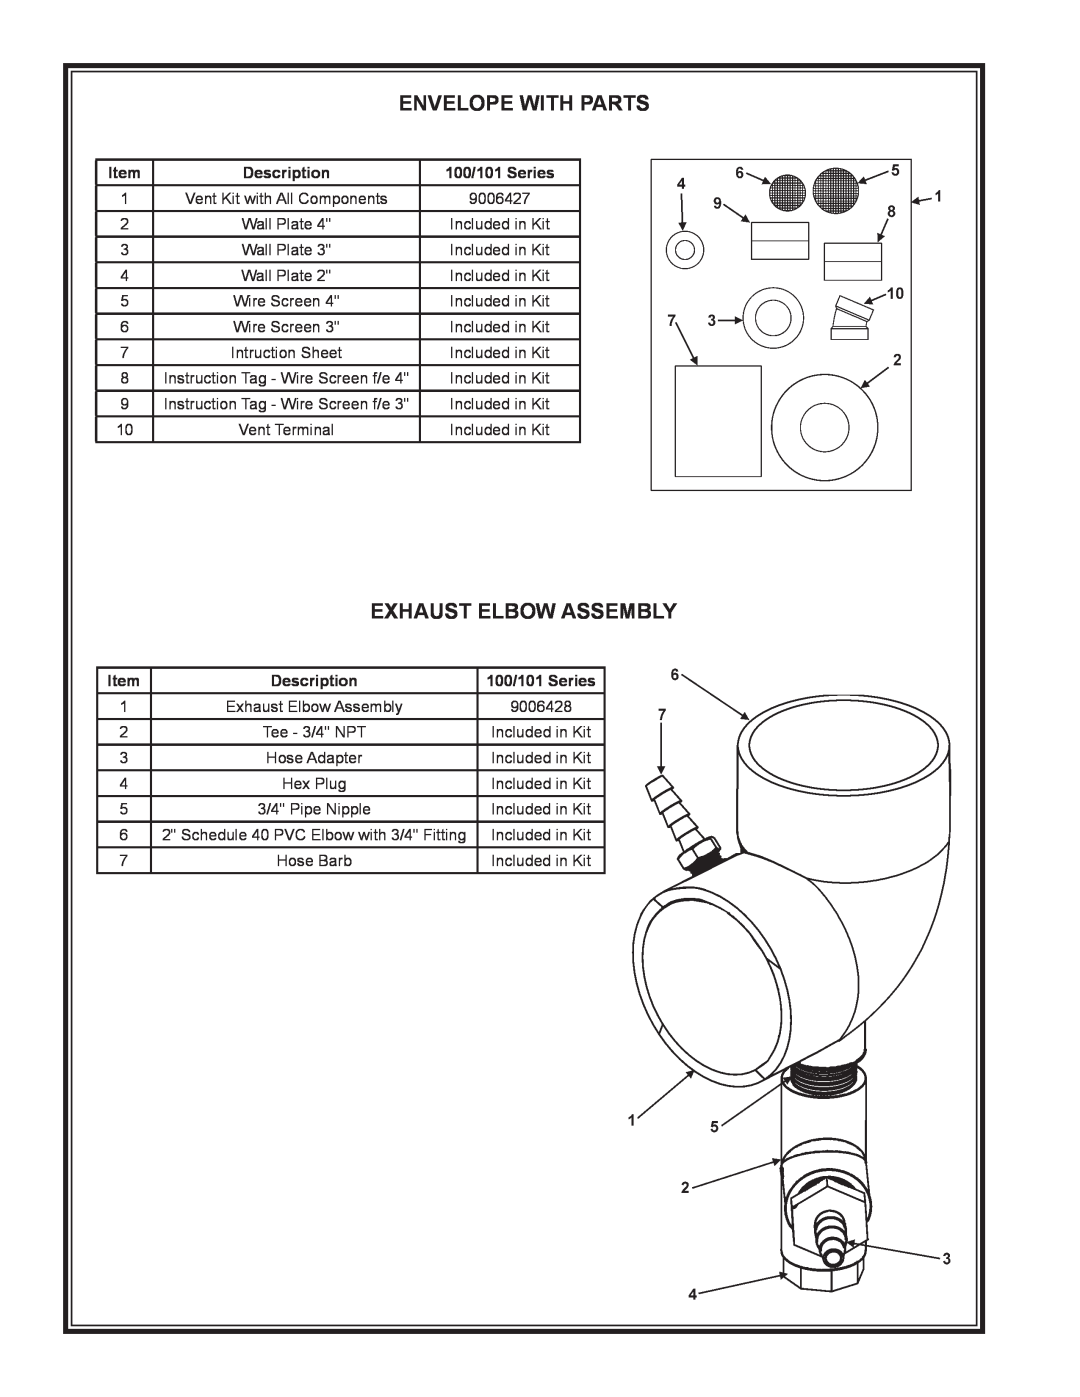 State Industries SHE50 100 manual Exhaust Elbow Assembly, Envelope With Parts, Description, 100/101 Series 